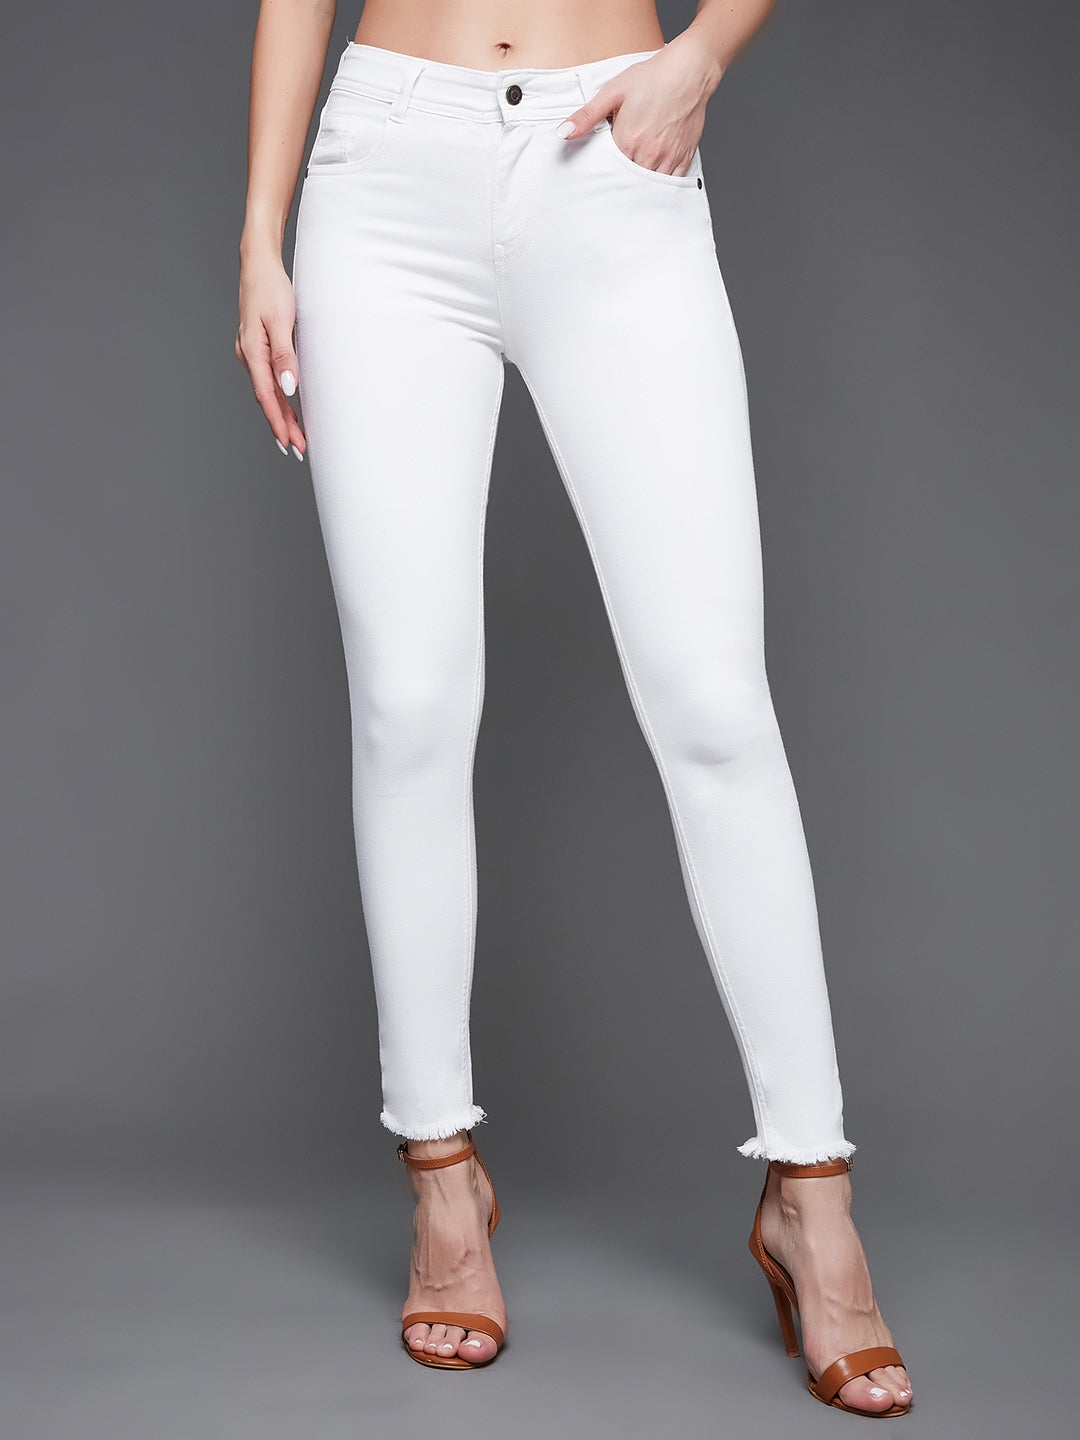 White Skinny Mid Rise Bleached Clean Look Cropped Stretchable Denim Jeans